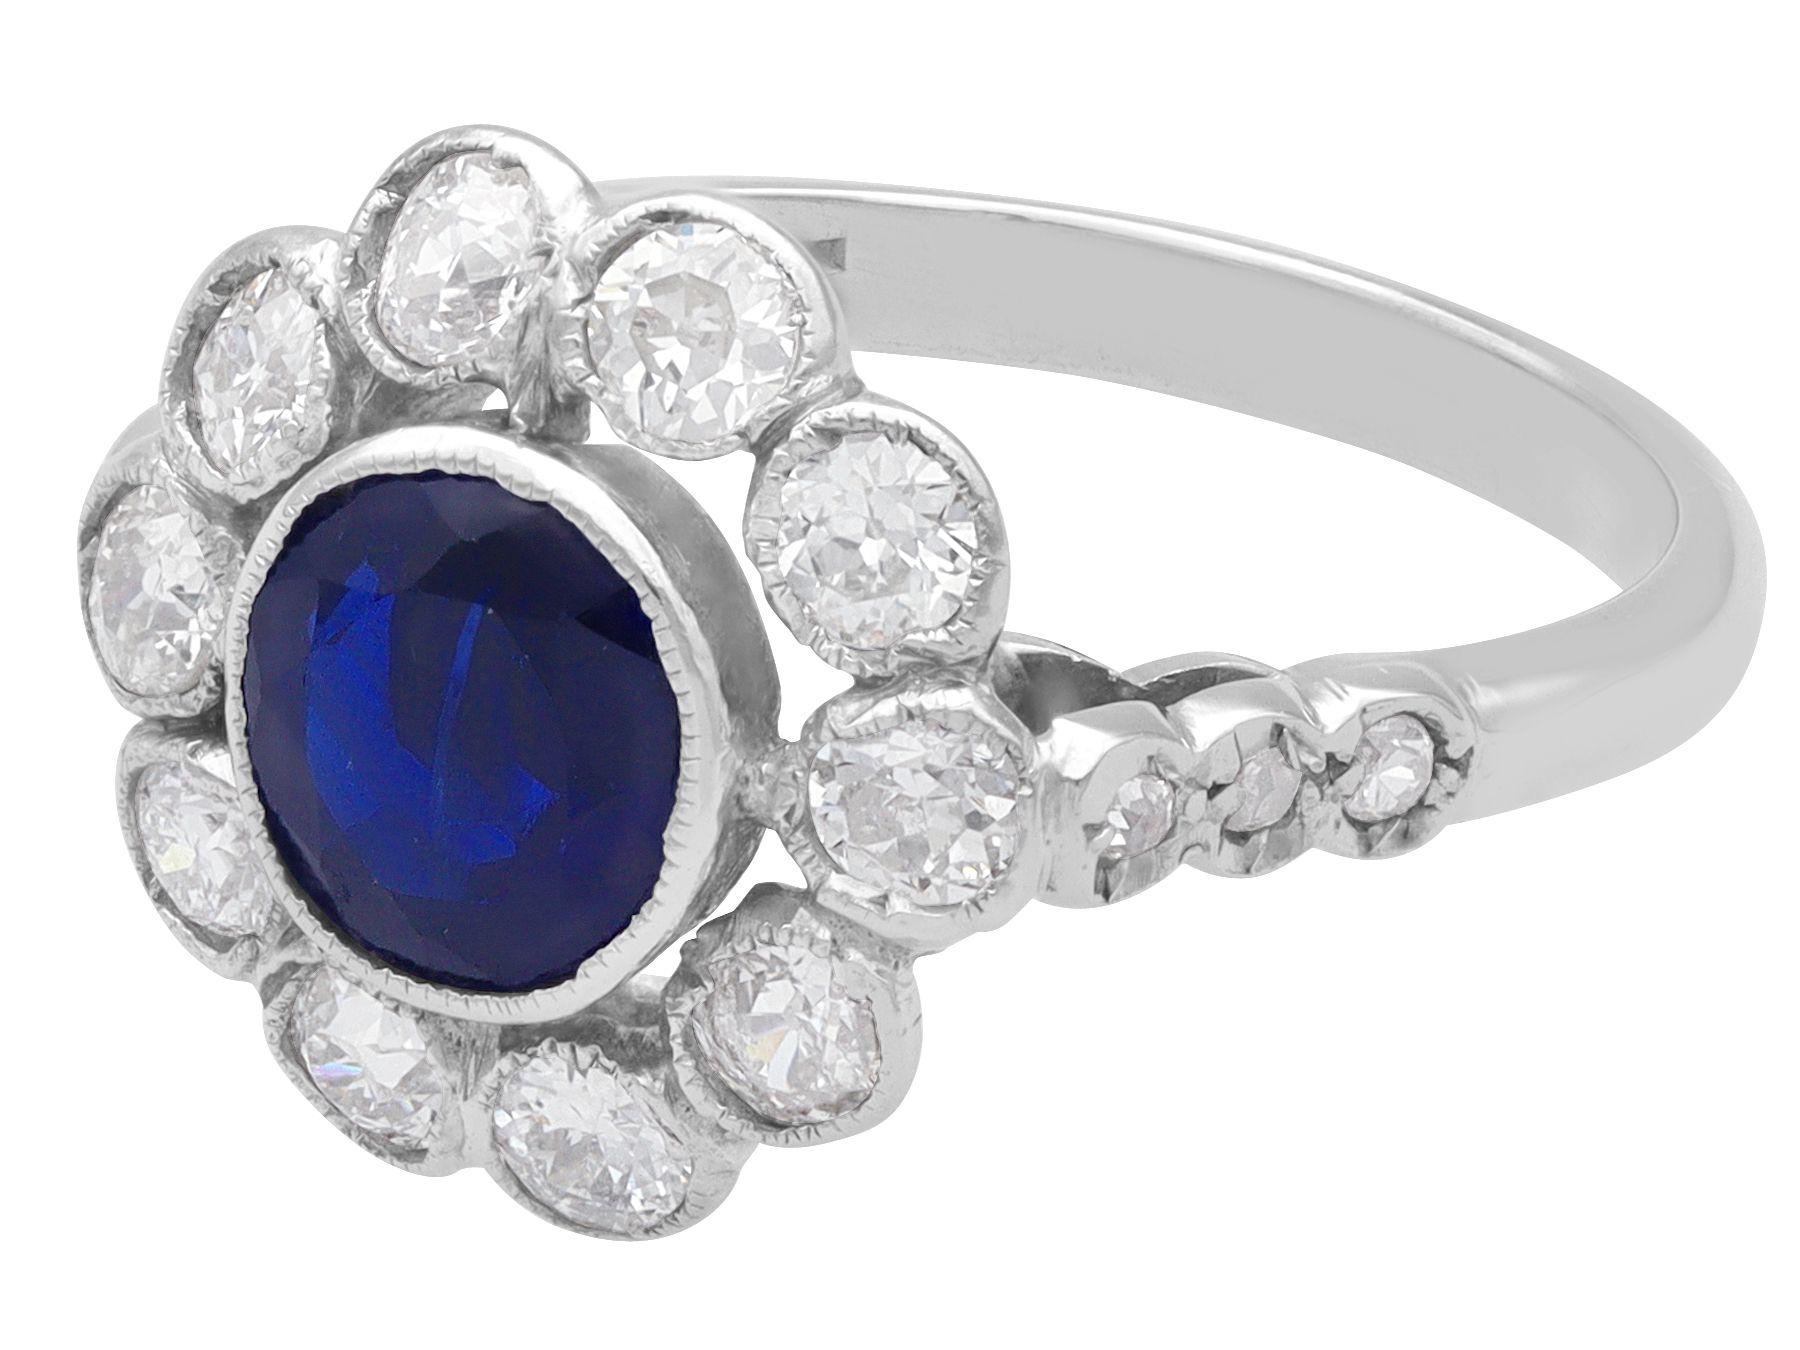 Cushion Cut Antique 1.28 Carat Sapphire and 1.20 Carat Diamond White Gold Cluster Ring For Sale